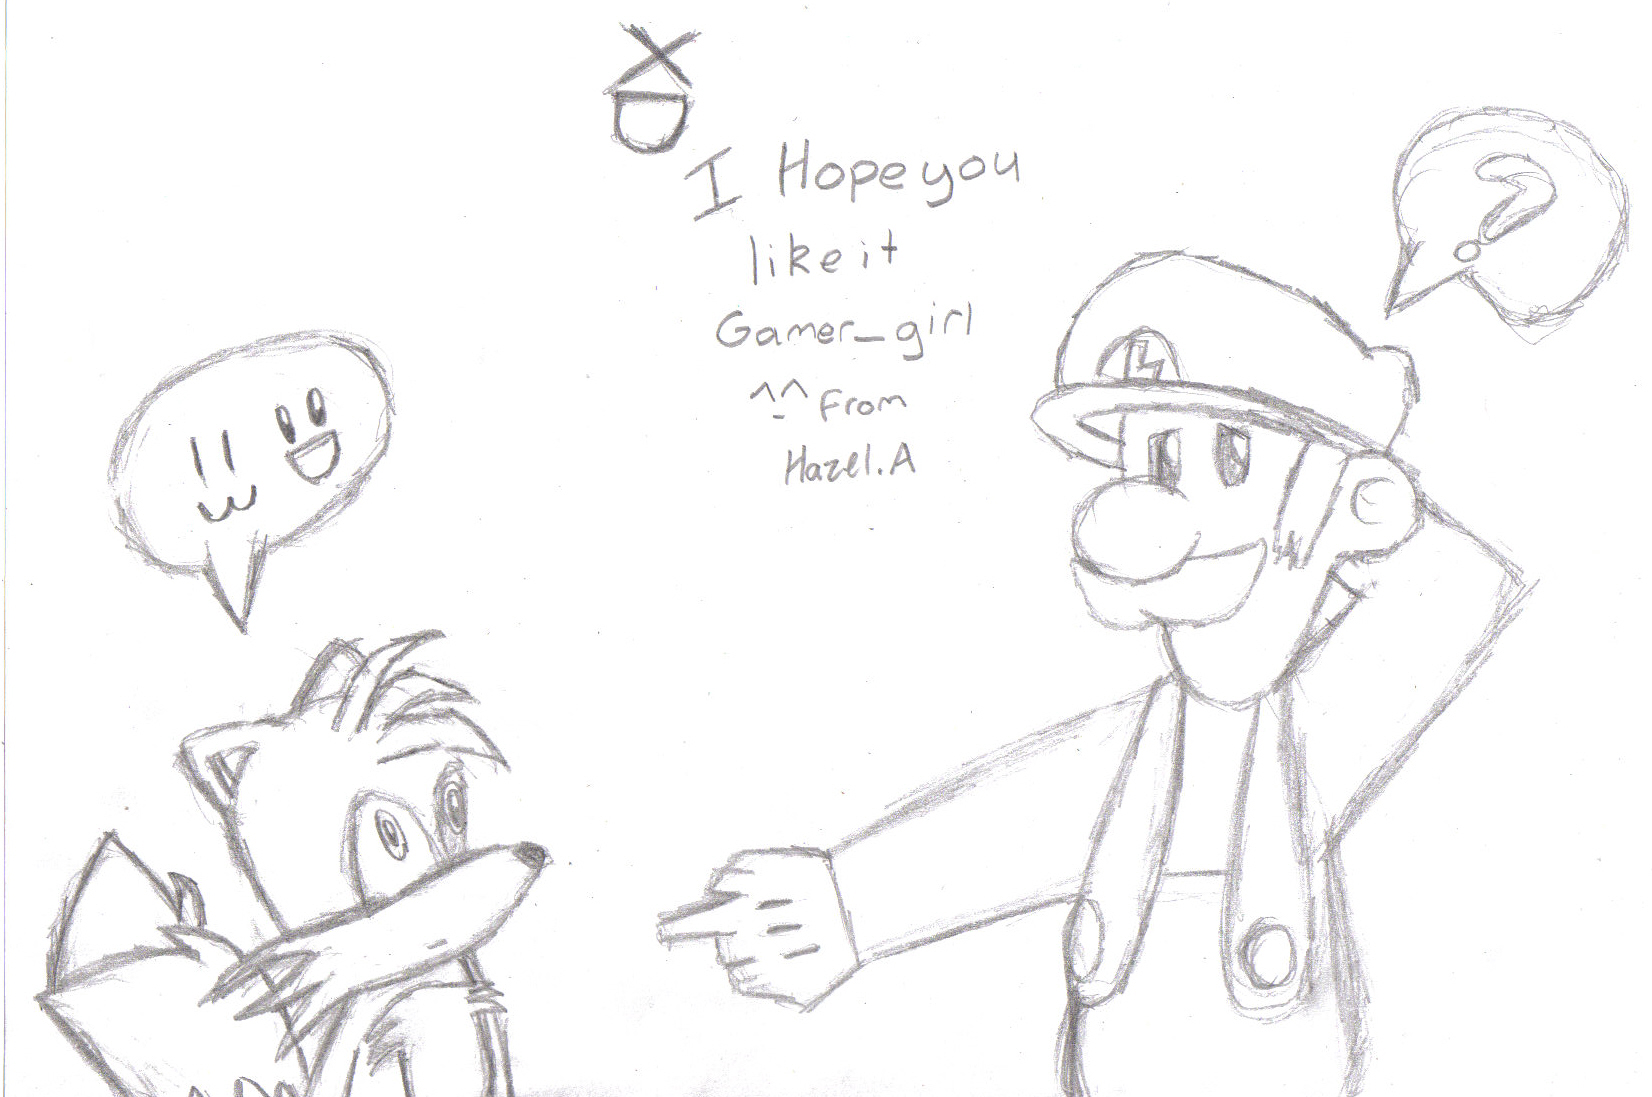 Luigi and tails request for Gamer_girl by manga_rules